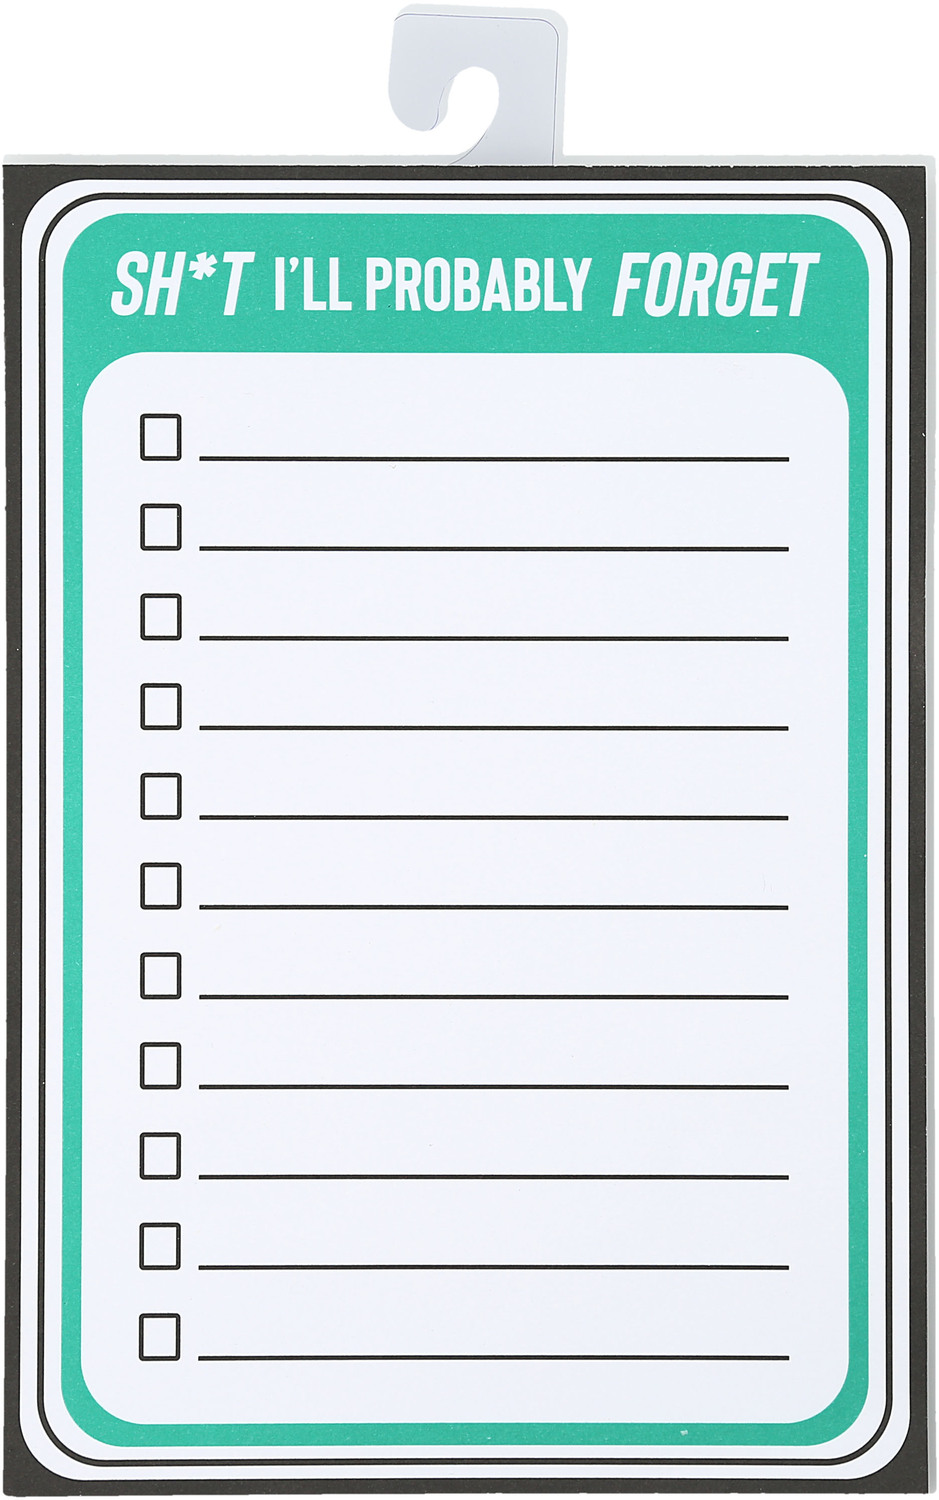 Sh*t I'll Probably Forget by Check Me Out - Sh*t I'll Probably Forget - 5.75" x 8.25" Magnetic Notepad